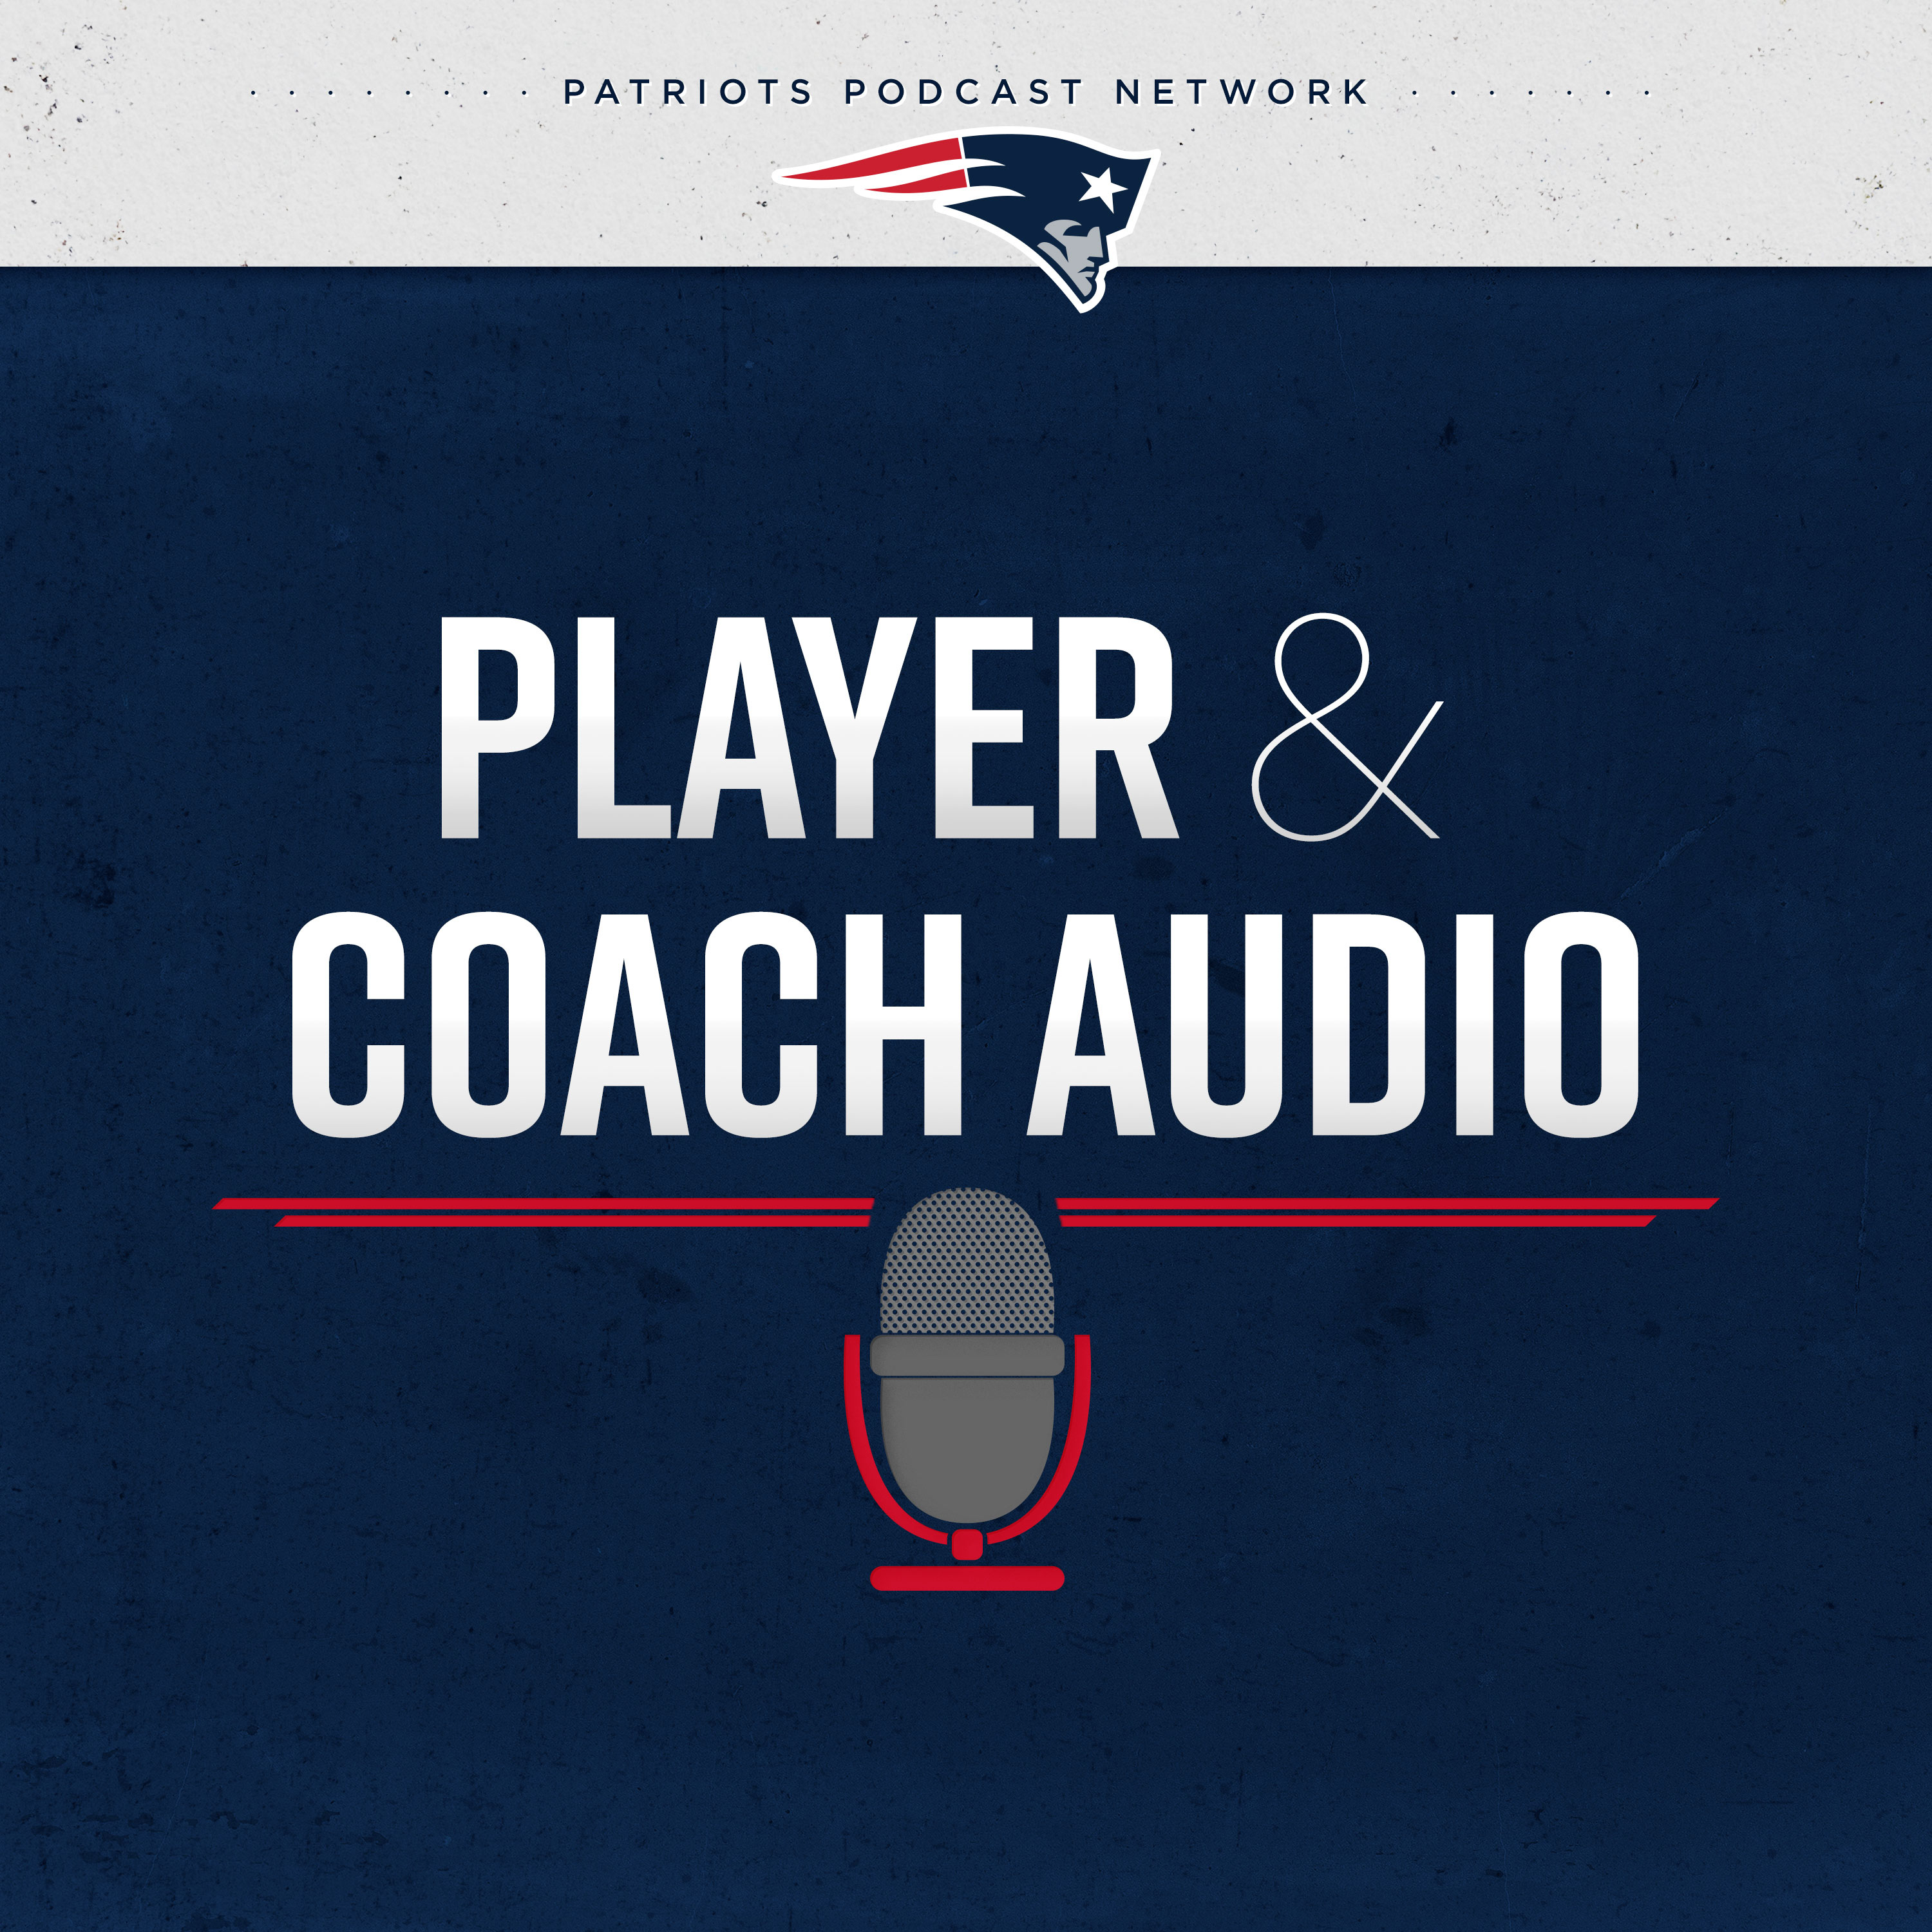 Dont'a Hightower 11/23: "It goes back to the initial process and what we believe in"